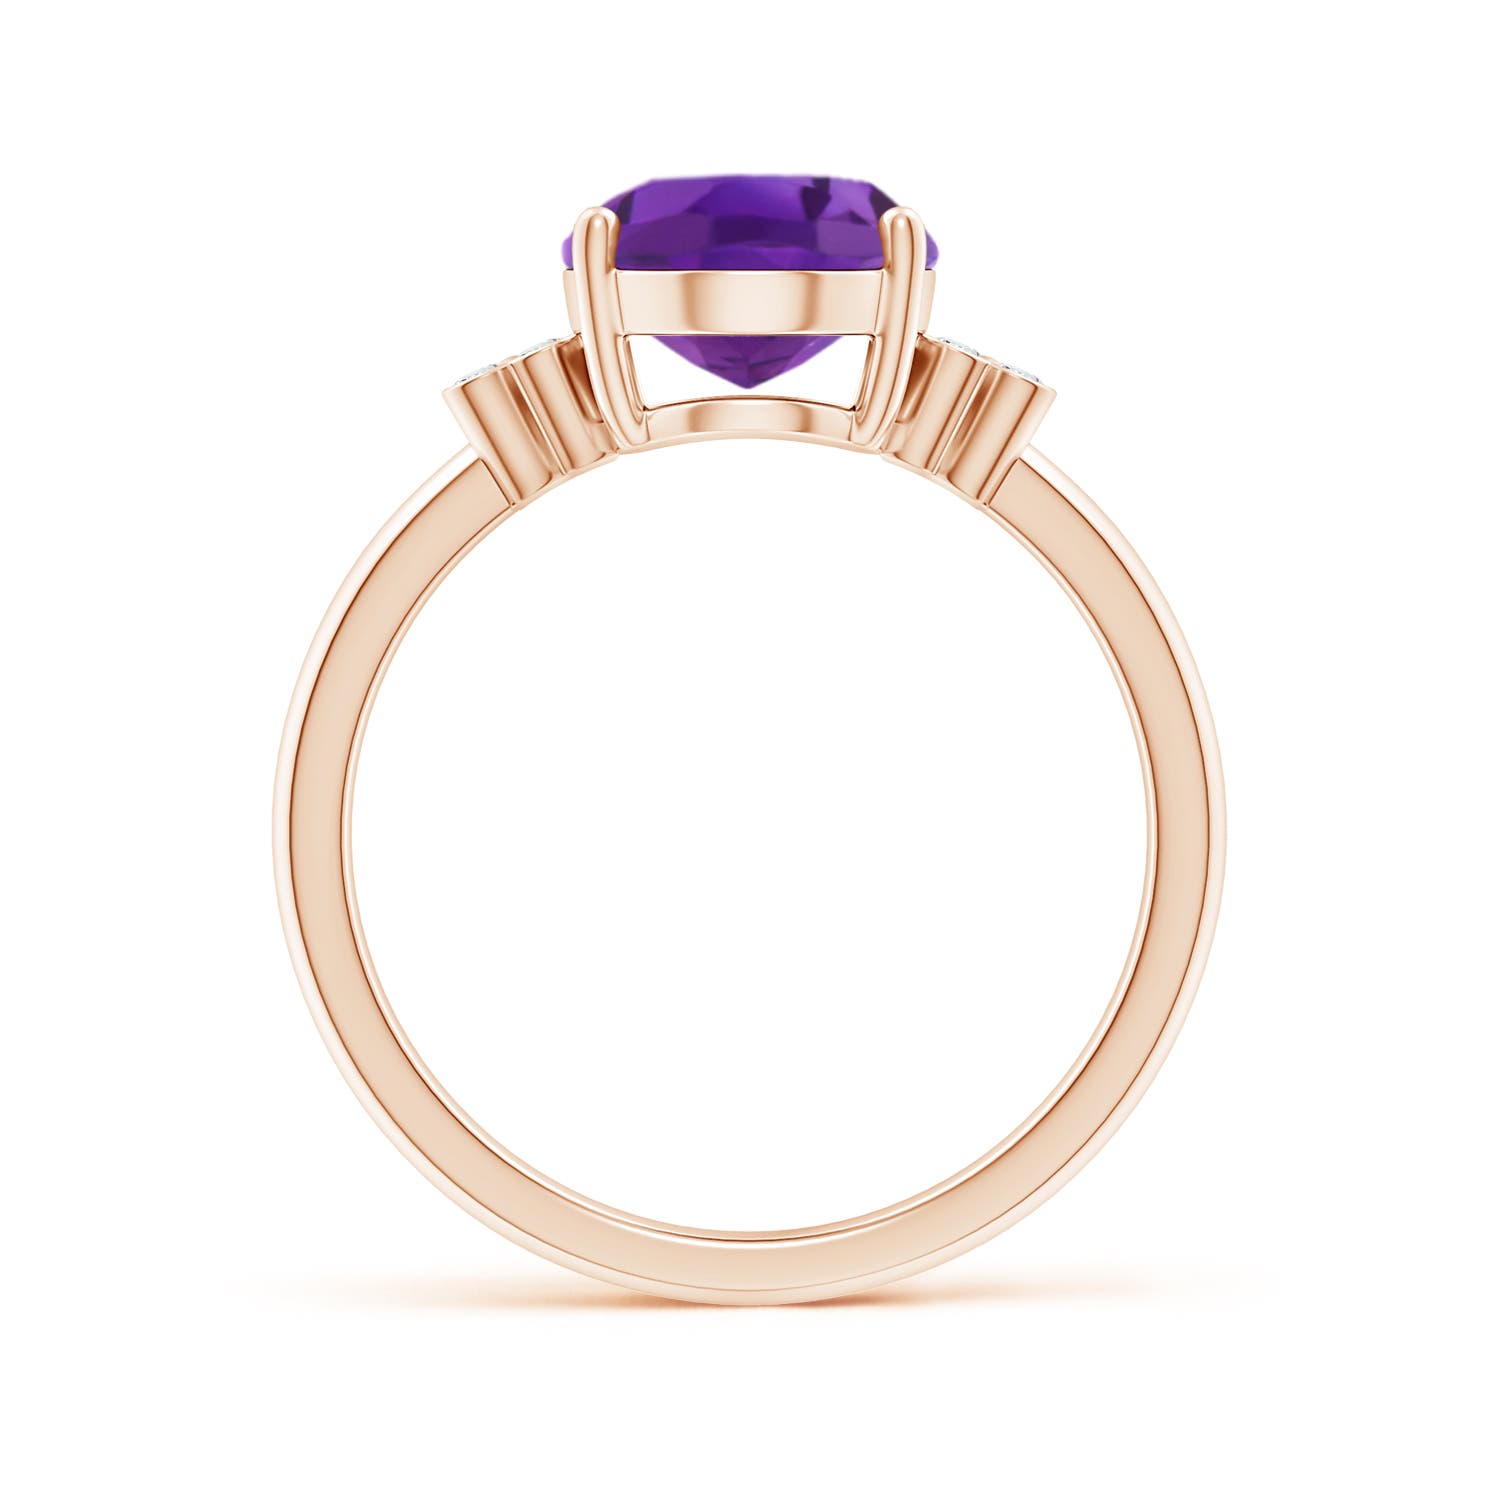 AAA- Amethyst / 2.36 CT / 14 KT Rose Gold